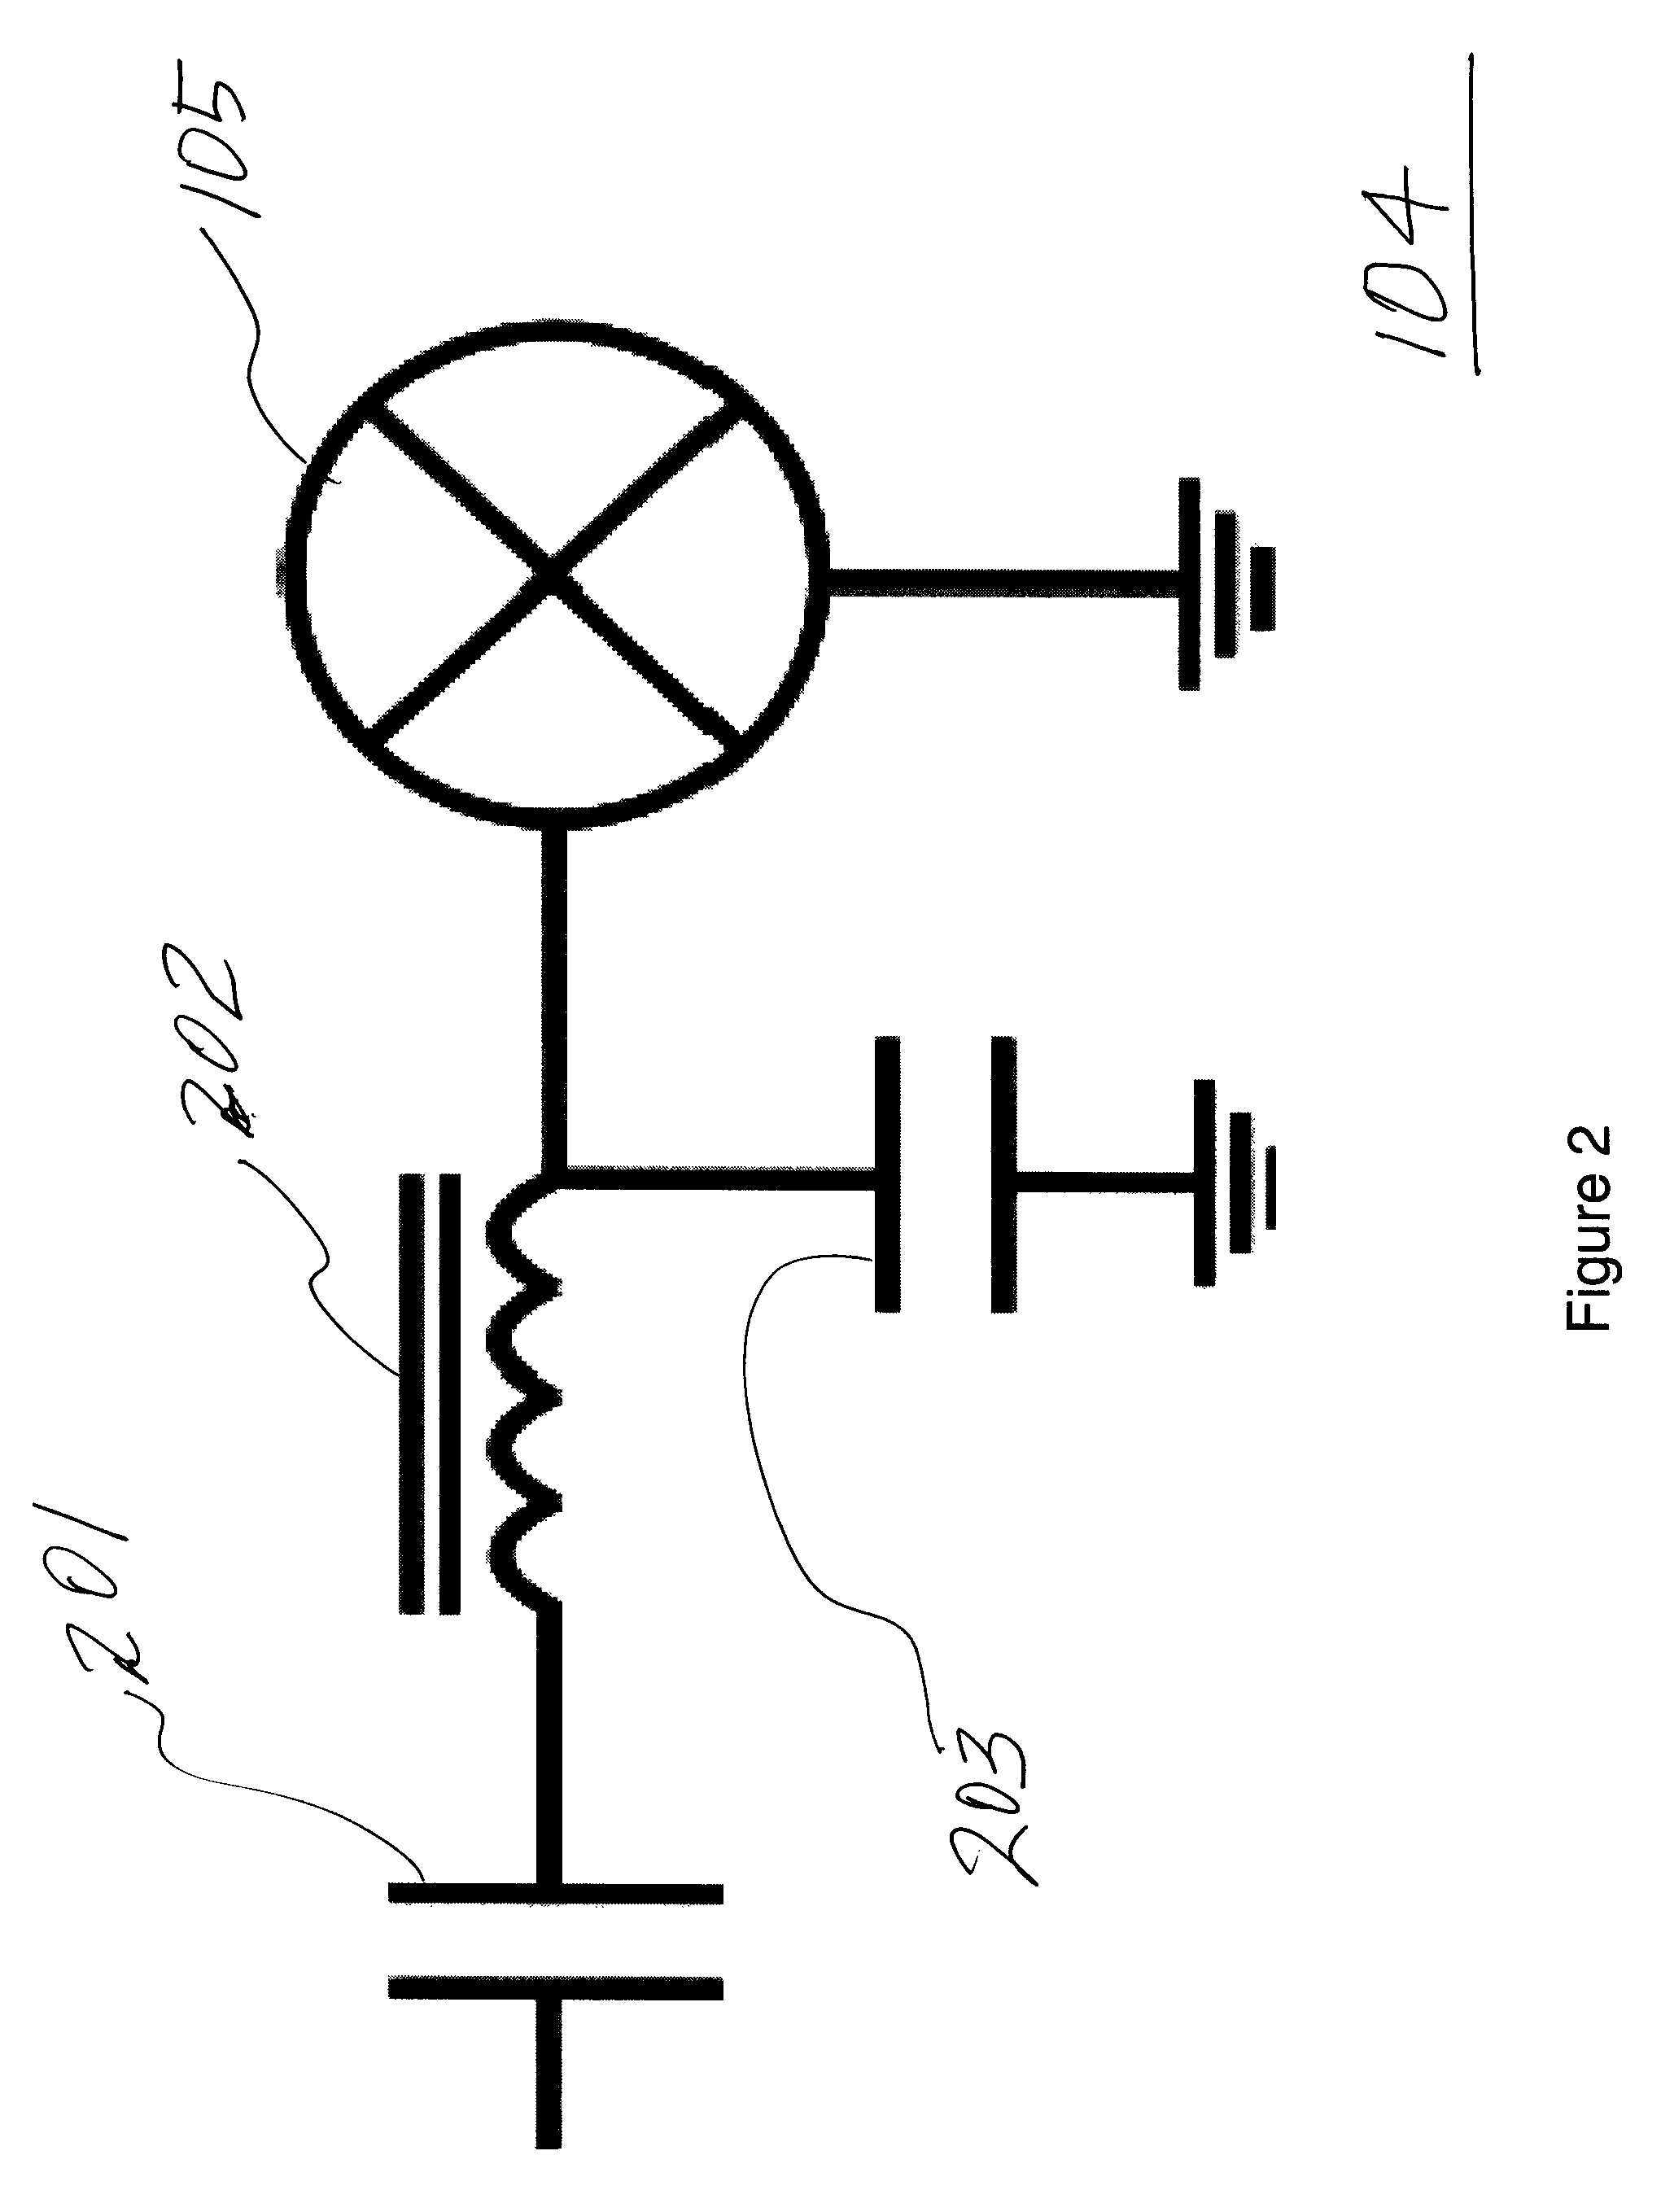 Method and apparatus for achieving inherent ignition voltage in operation of a high intensity discharge lamp